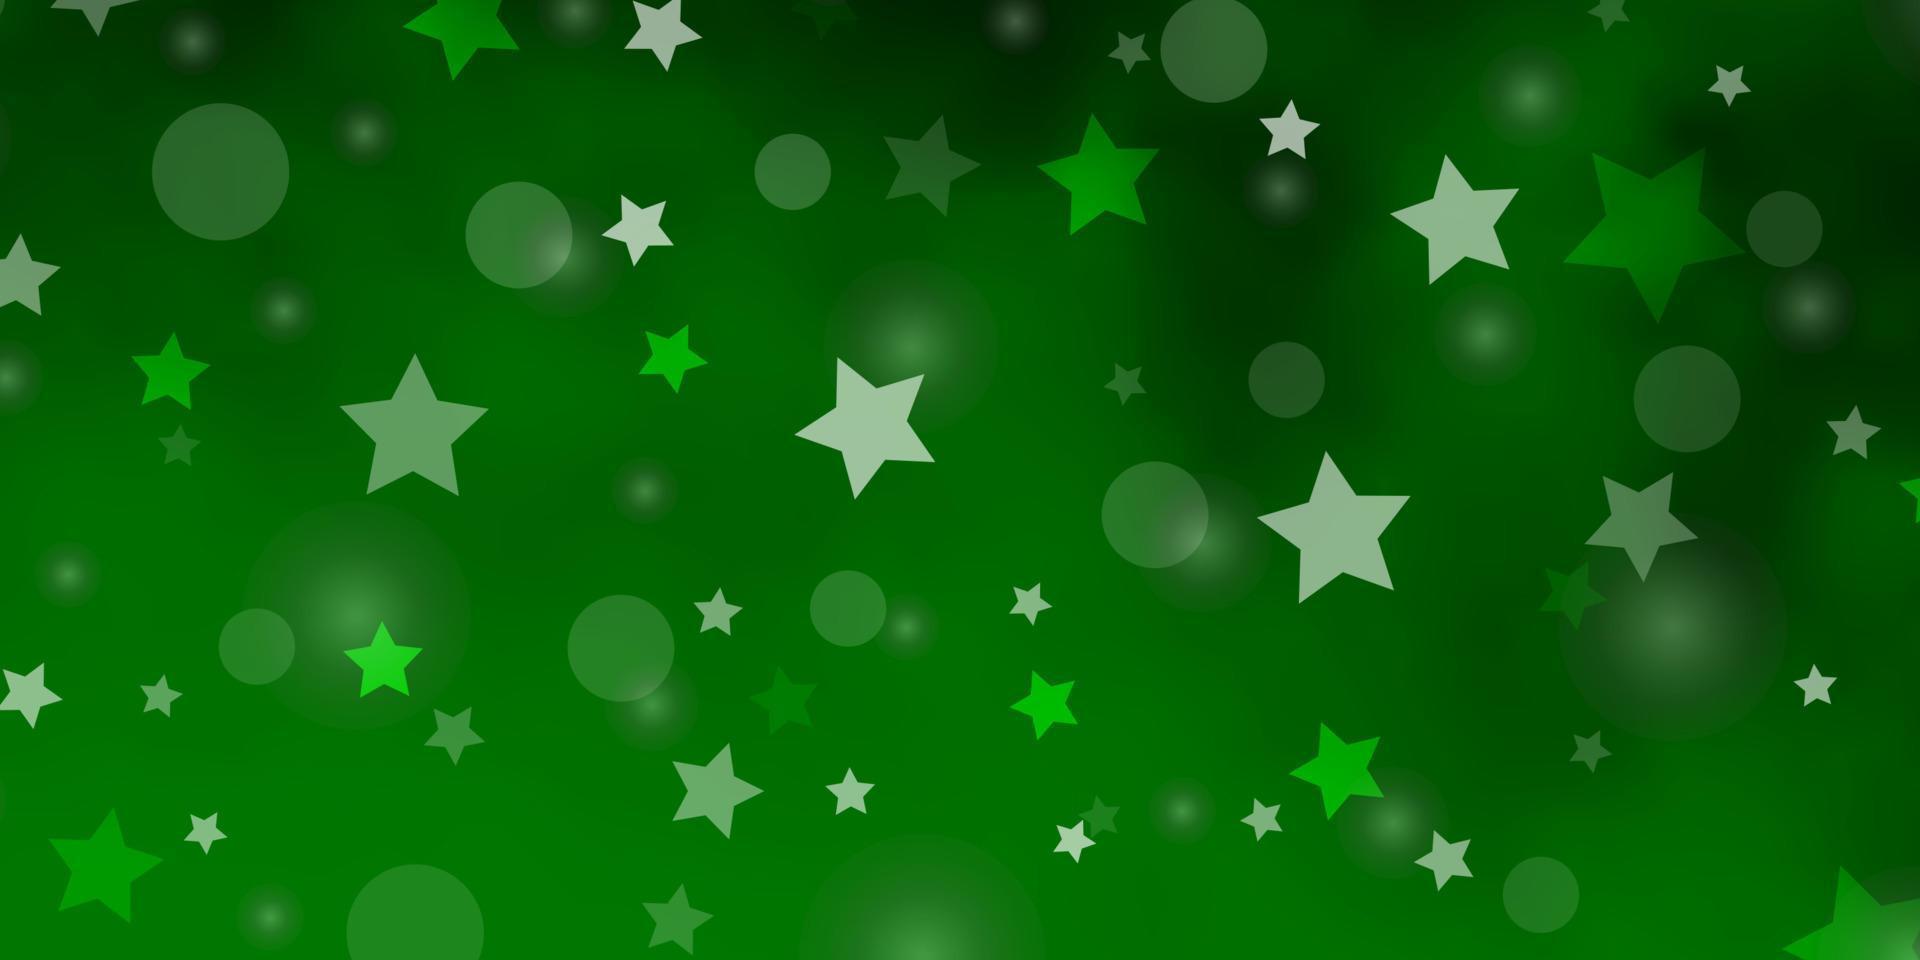 Light Green vector template with circles, stars.